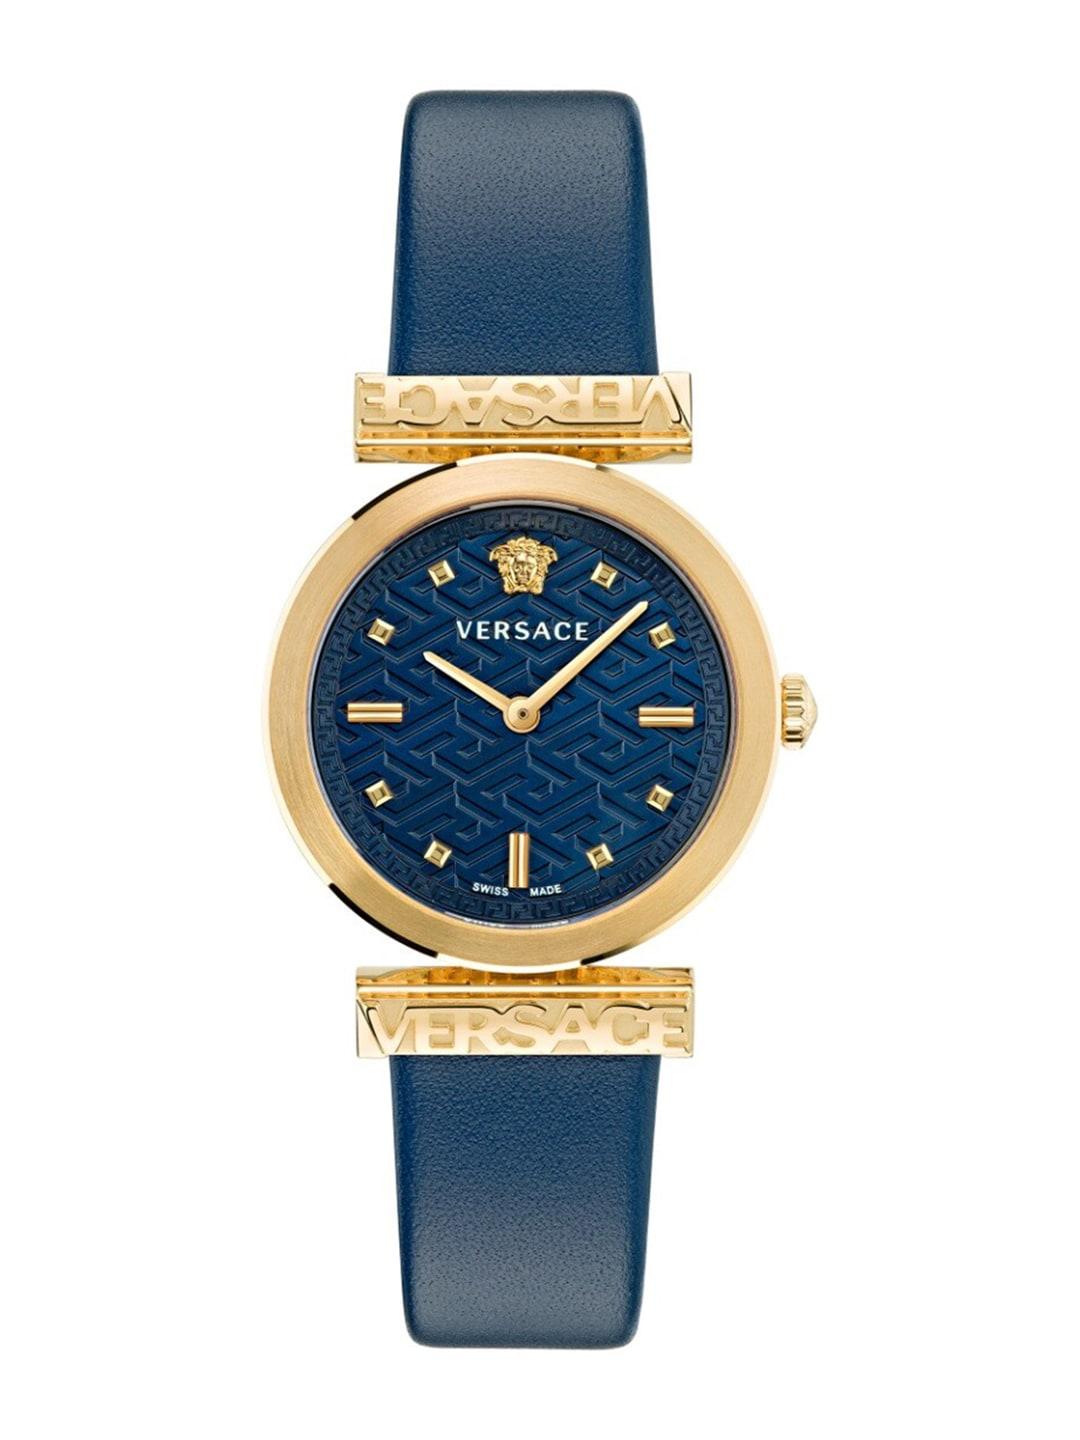 Versace Women Textured Dial & Leather Straps Analogue Watch VE6J00223